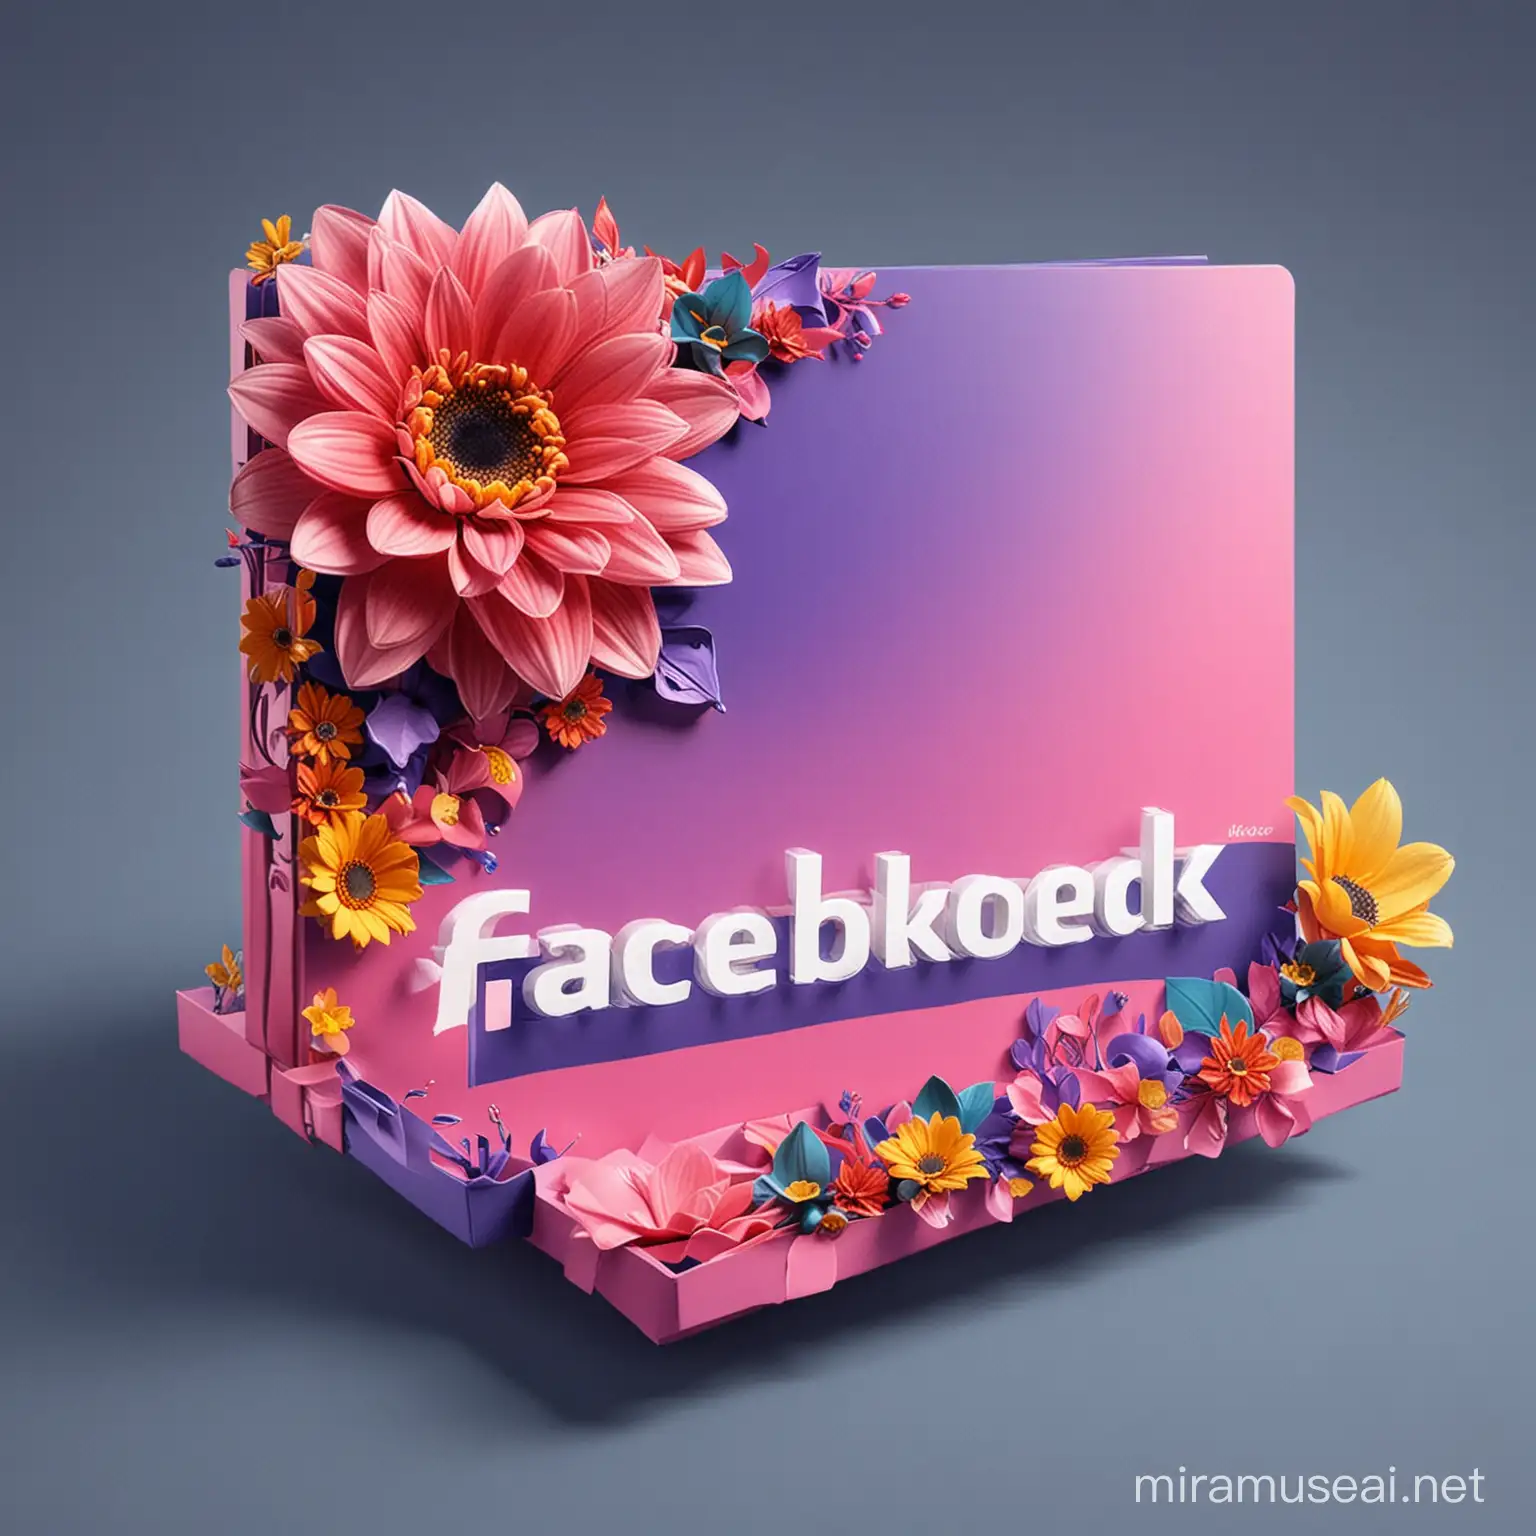 "Create a vibrant and eye-catching 3D cover for my Facebook page. Incorporate elements that reflect the theme of my page and convey a sense of creativity and professionalism. Use bold colors and dynamic composition to grab attention." my page is for marketing for threes and flowers and more